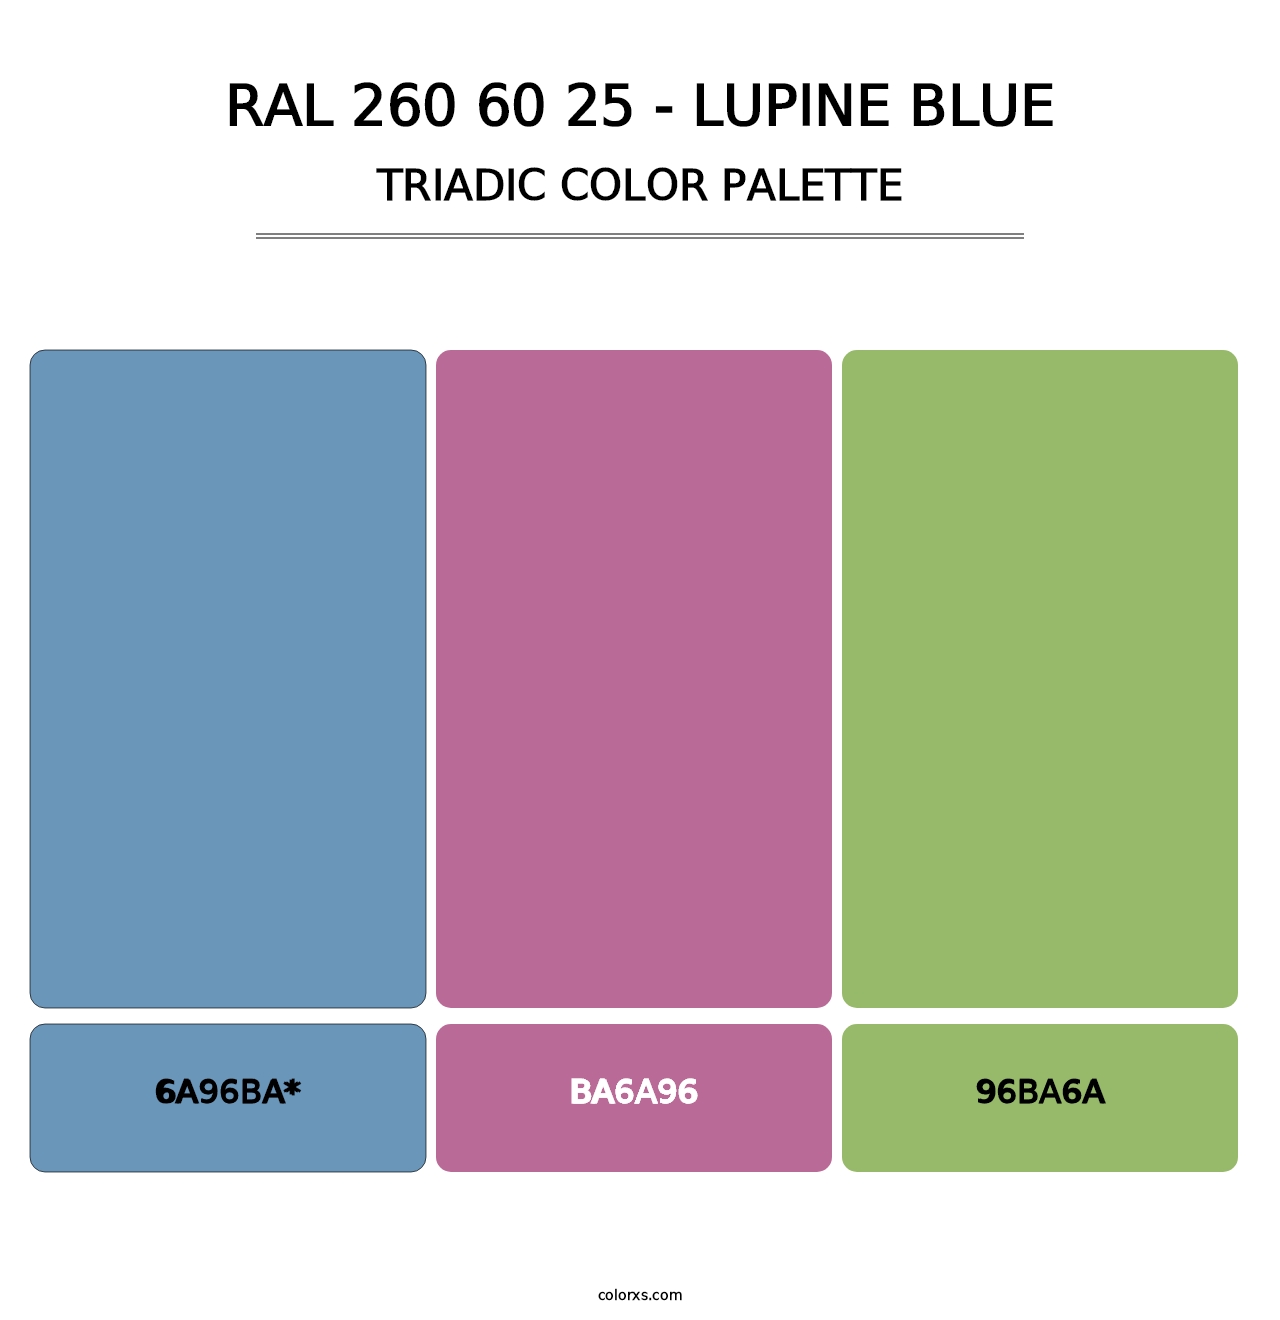 RAL 260 60 25 - Lupine Blue - Triadic Color Palette